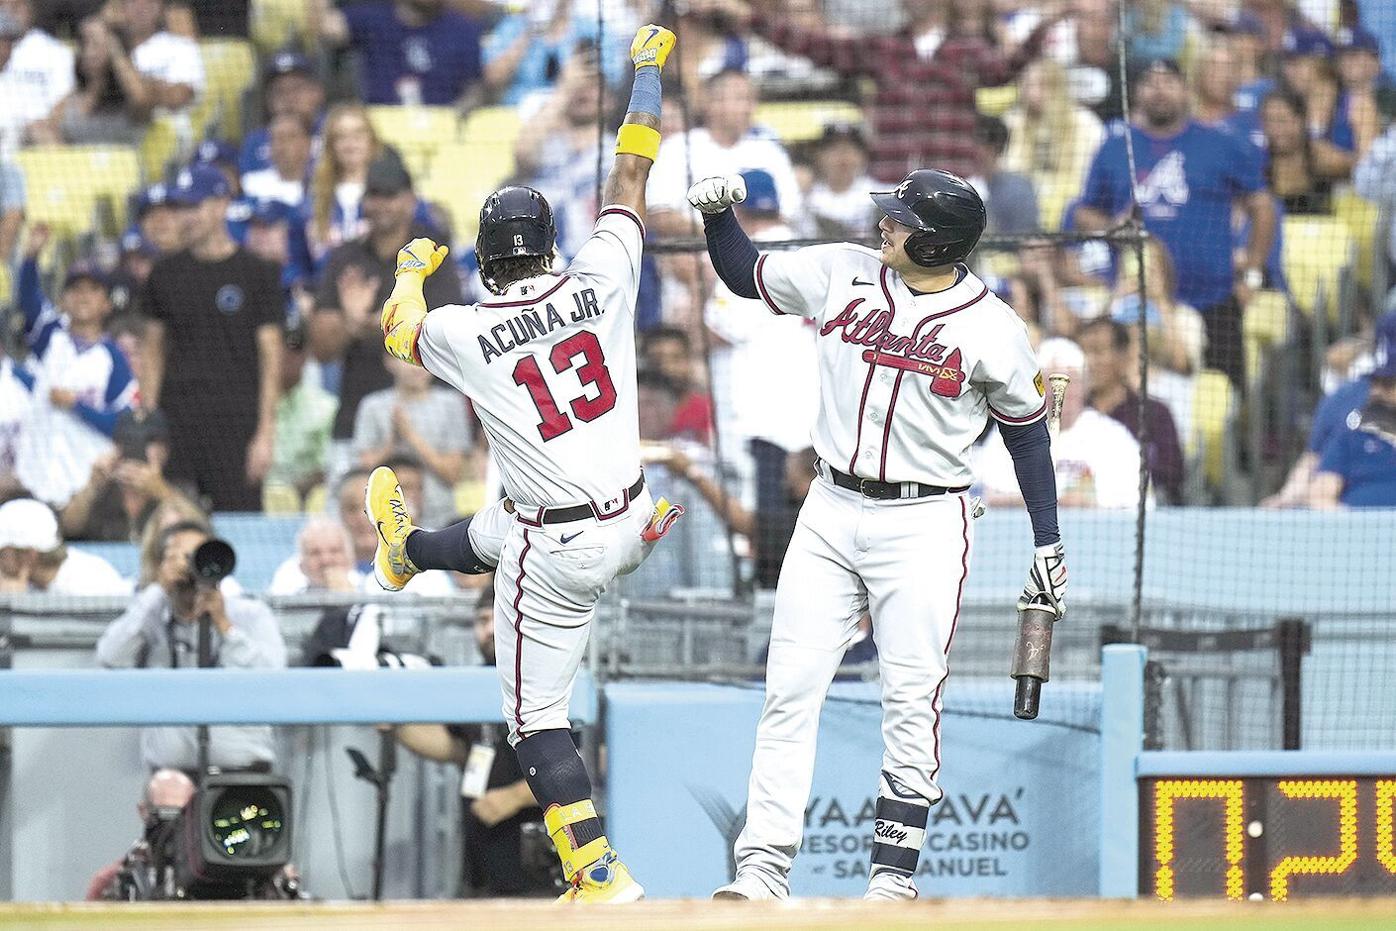 Braves avoid sweep with walk-off win over Dodgers - Los Angeles Times